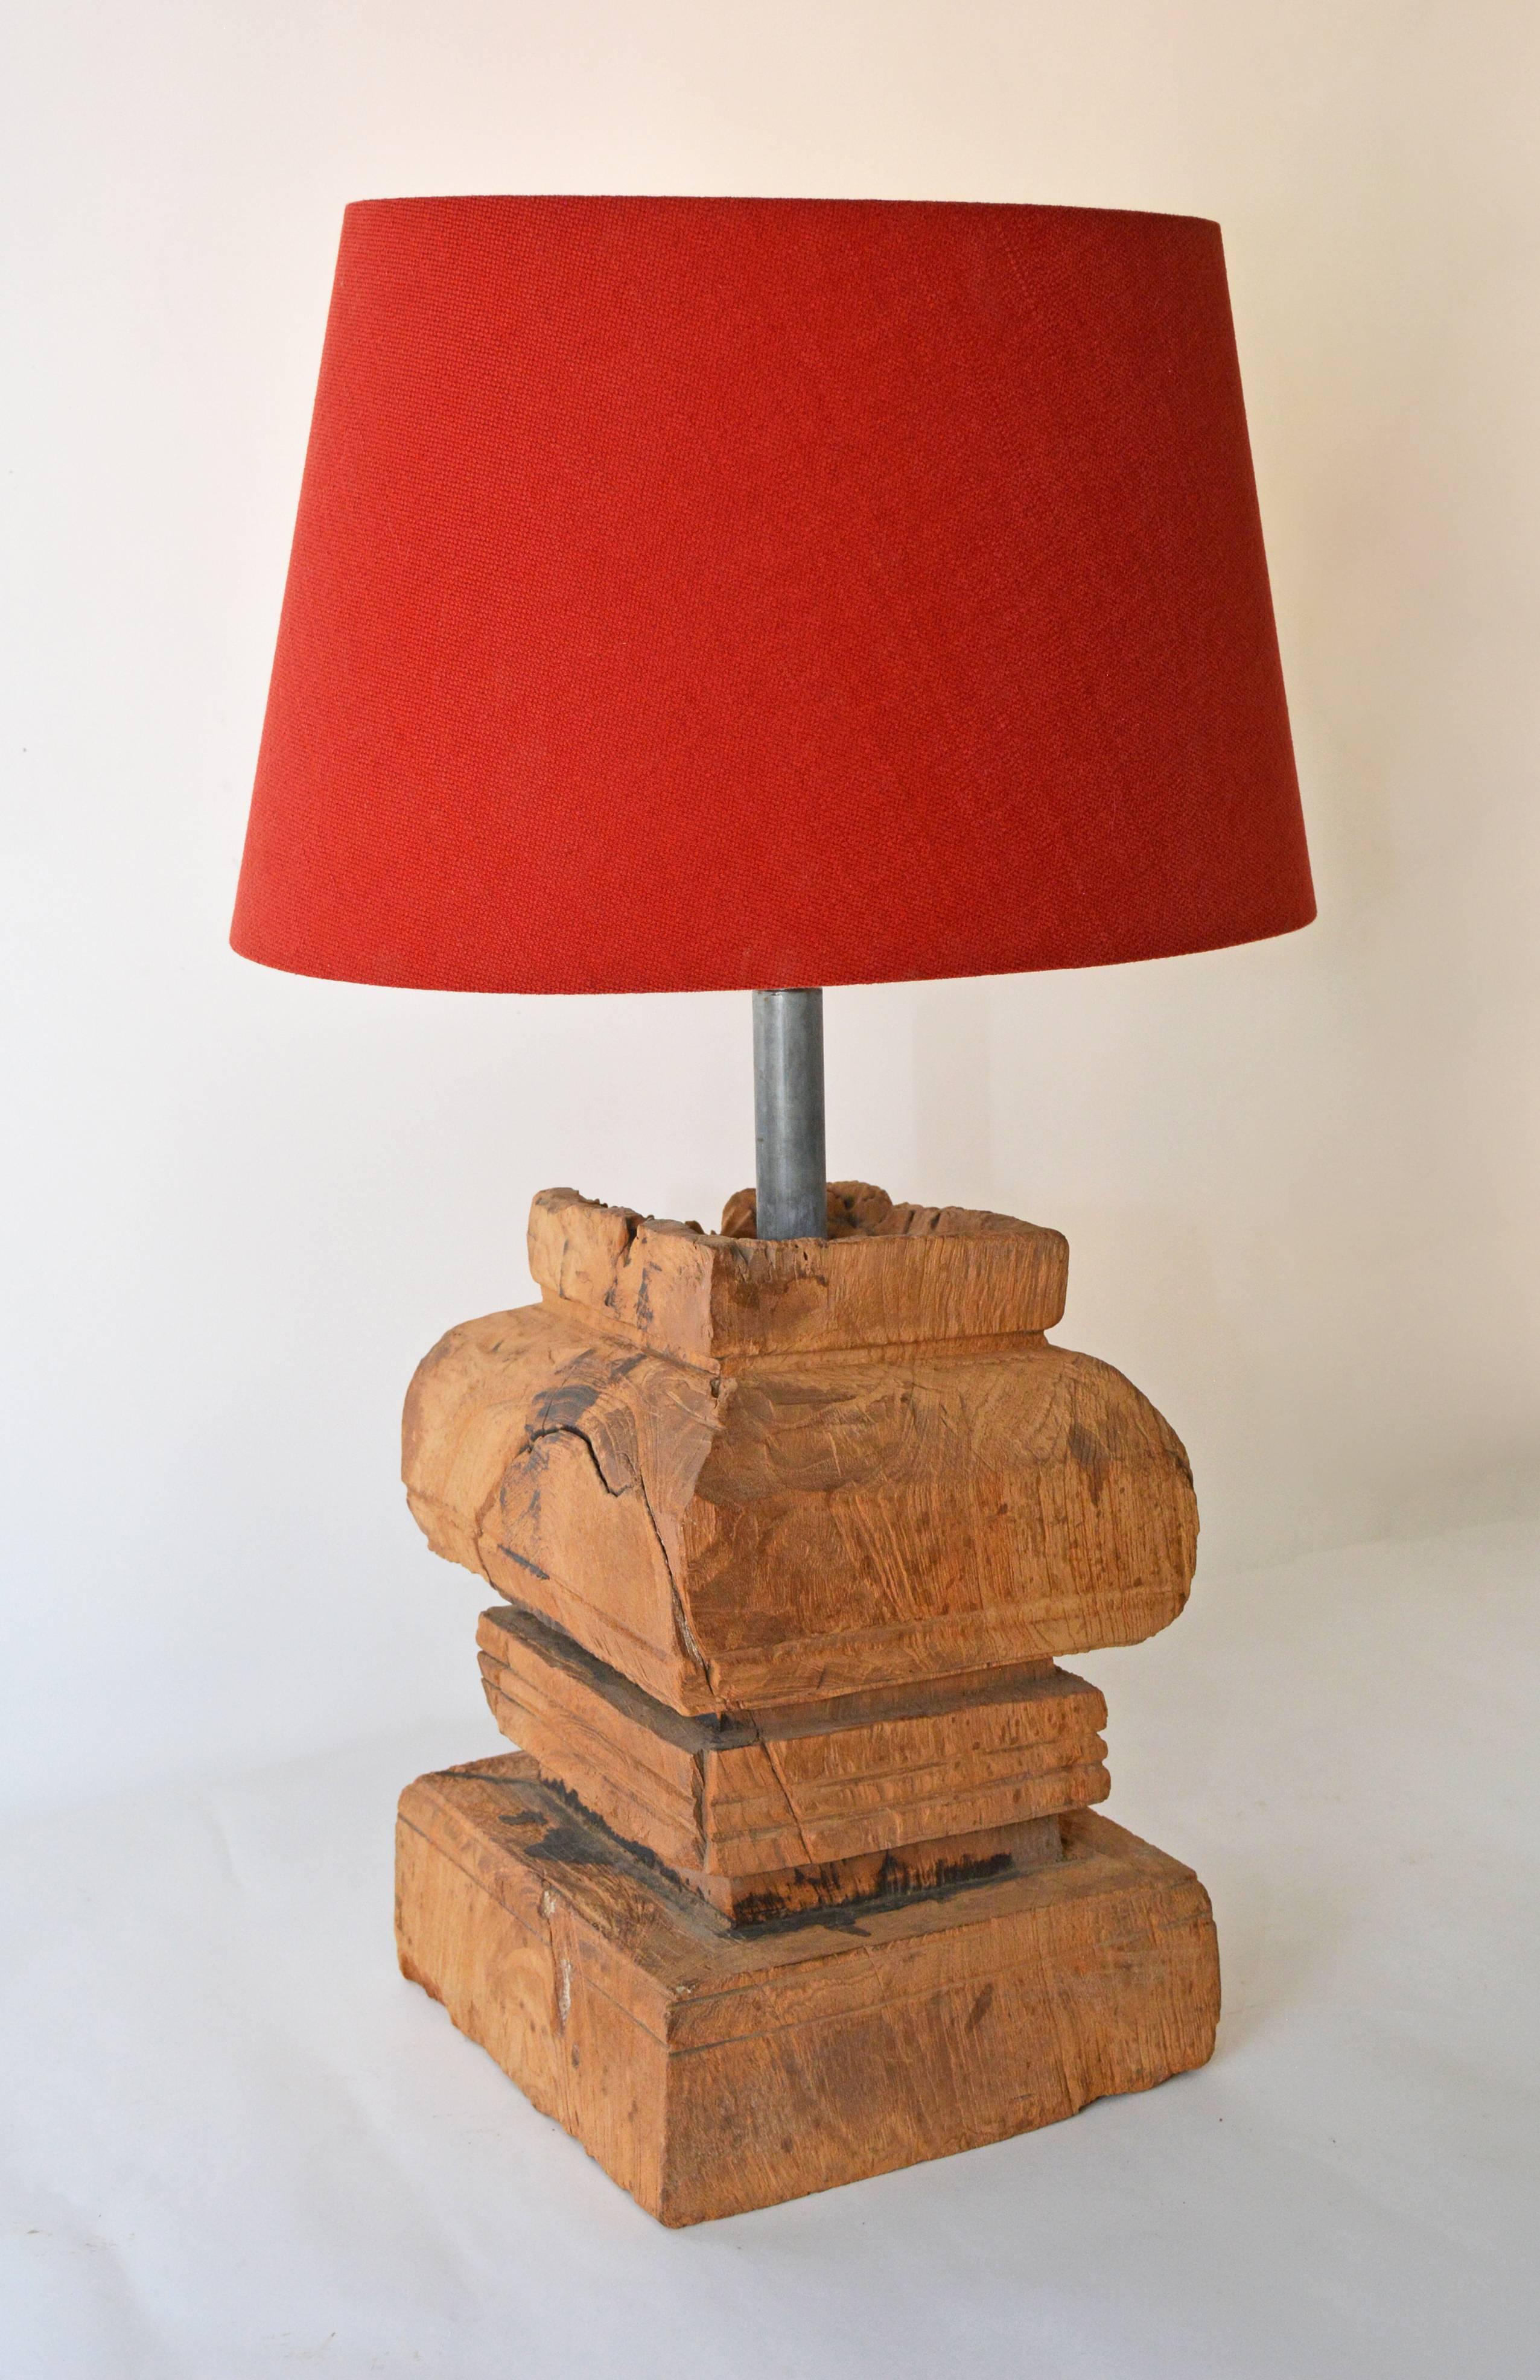 The rustic organic lamp is composed of an antique Chinese carved wood base made from an architectural element and a red Belgium linen oval shade. Lamp and shade can be sold separately. Lamp $1200/shade $600.

Measures: Shade 10.50